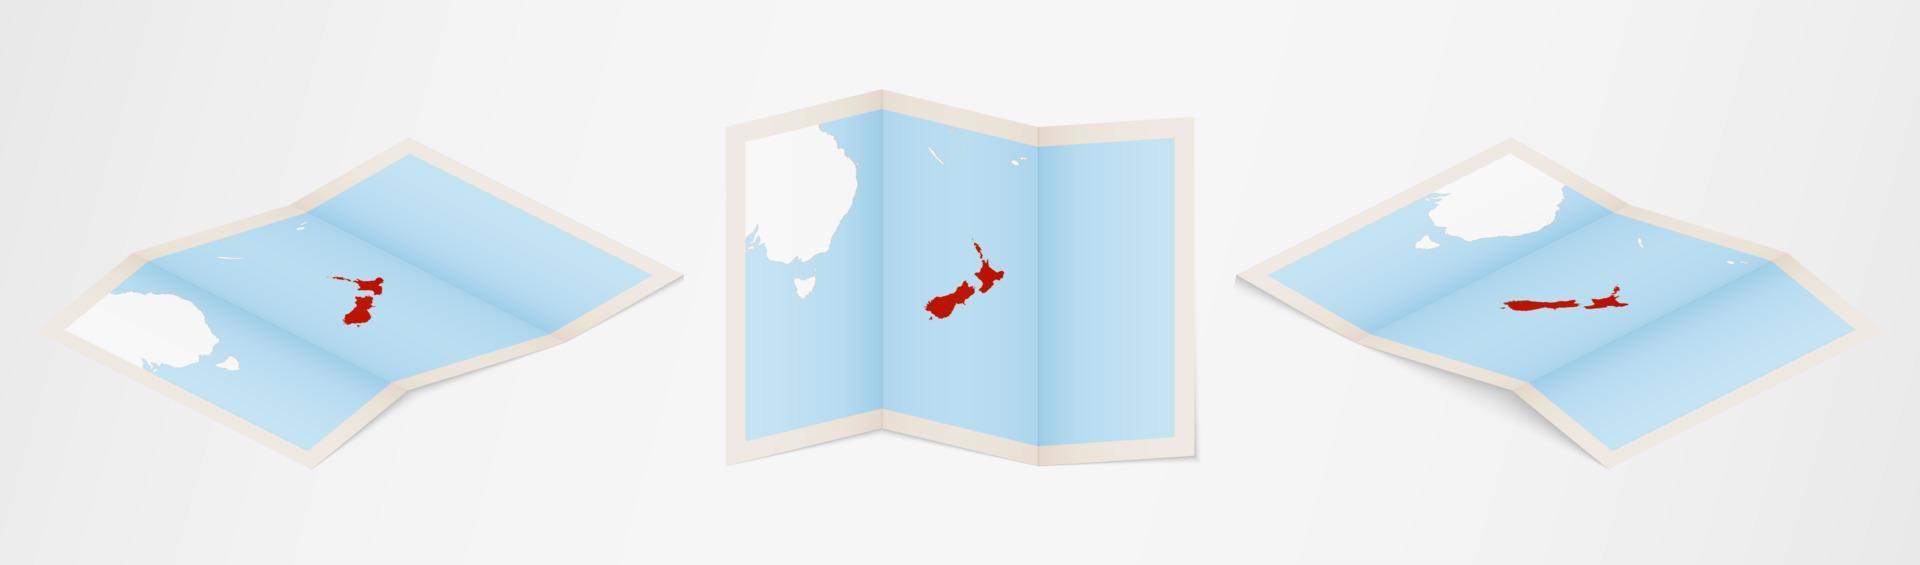 Folded map of New Zealand in three different versions. vector